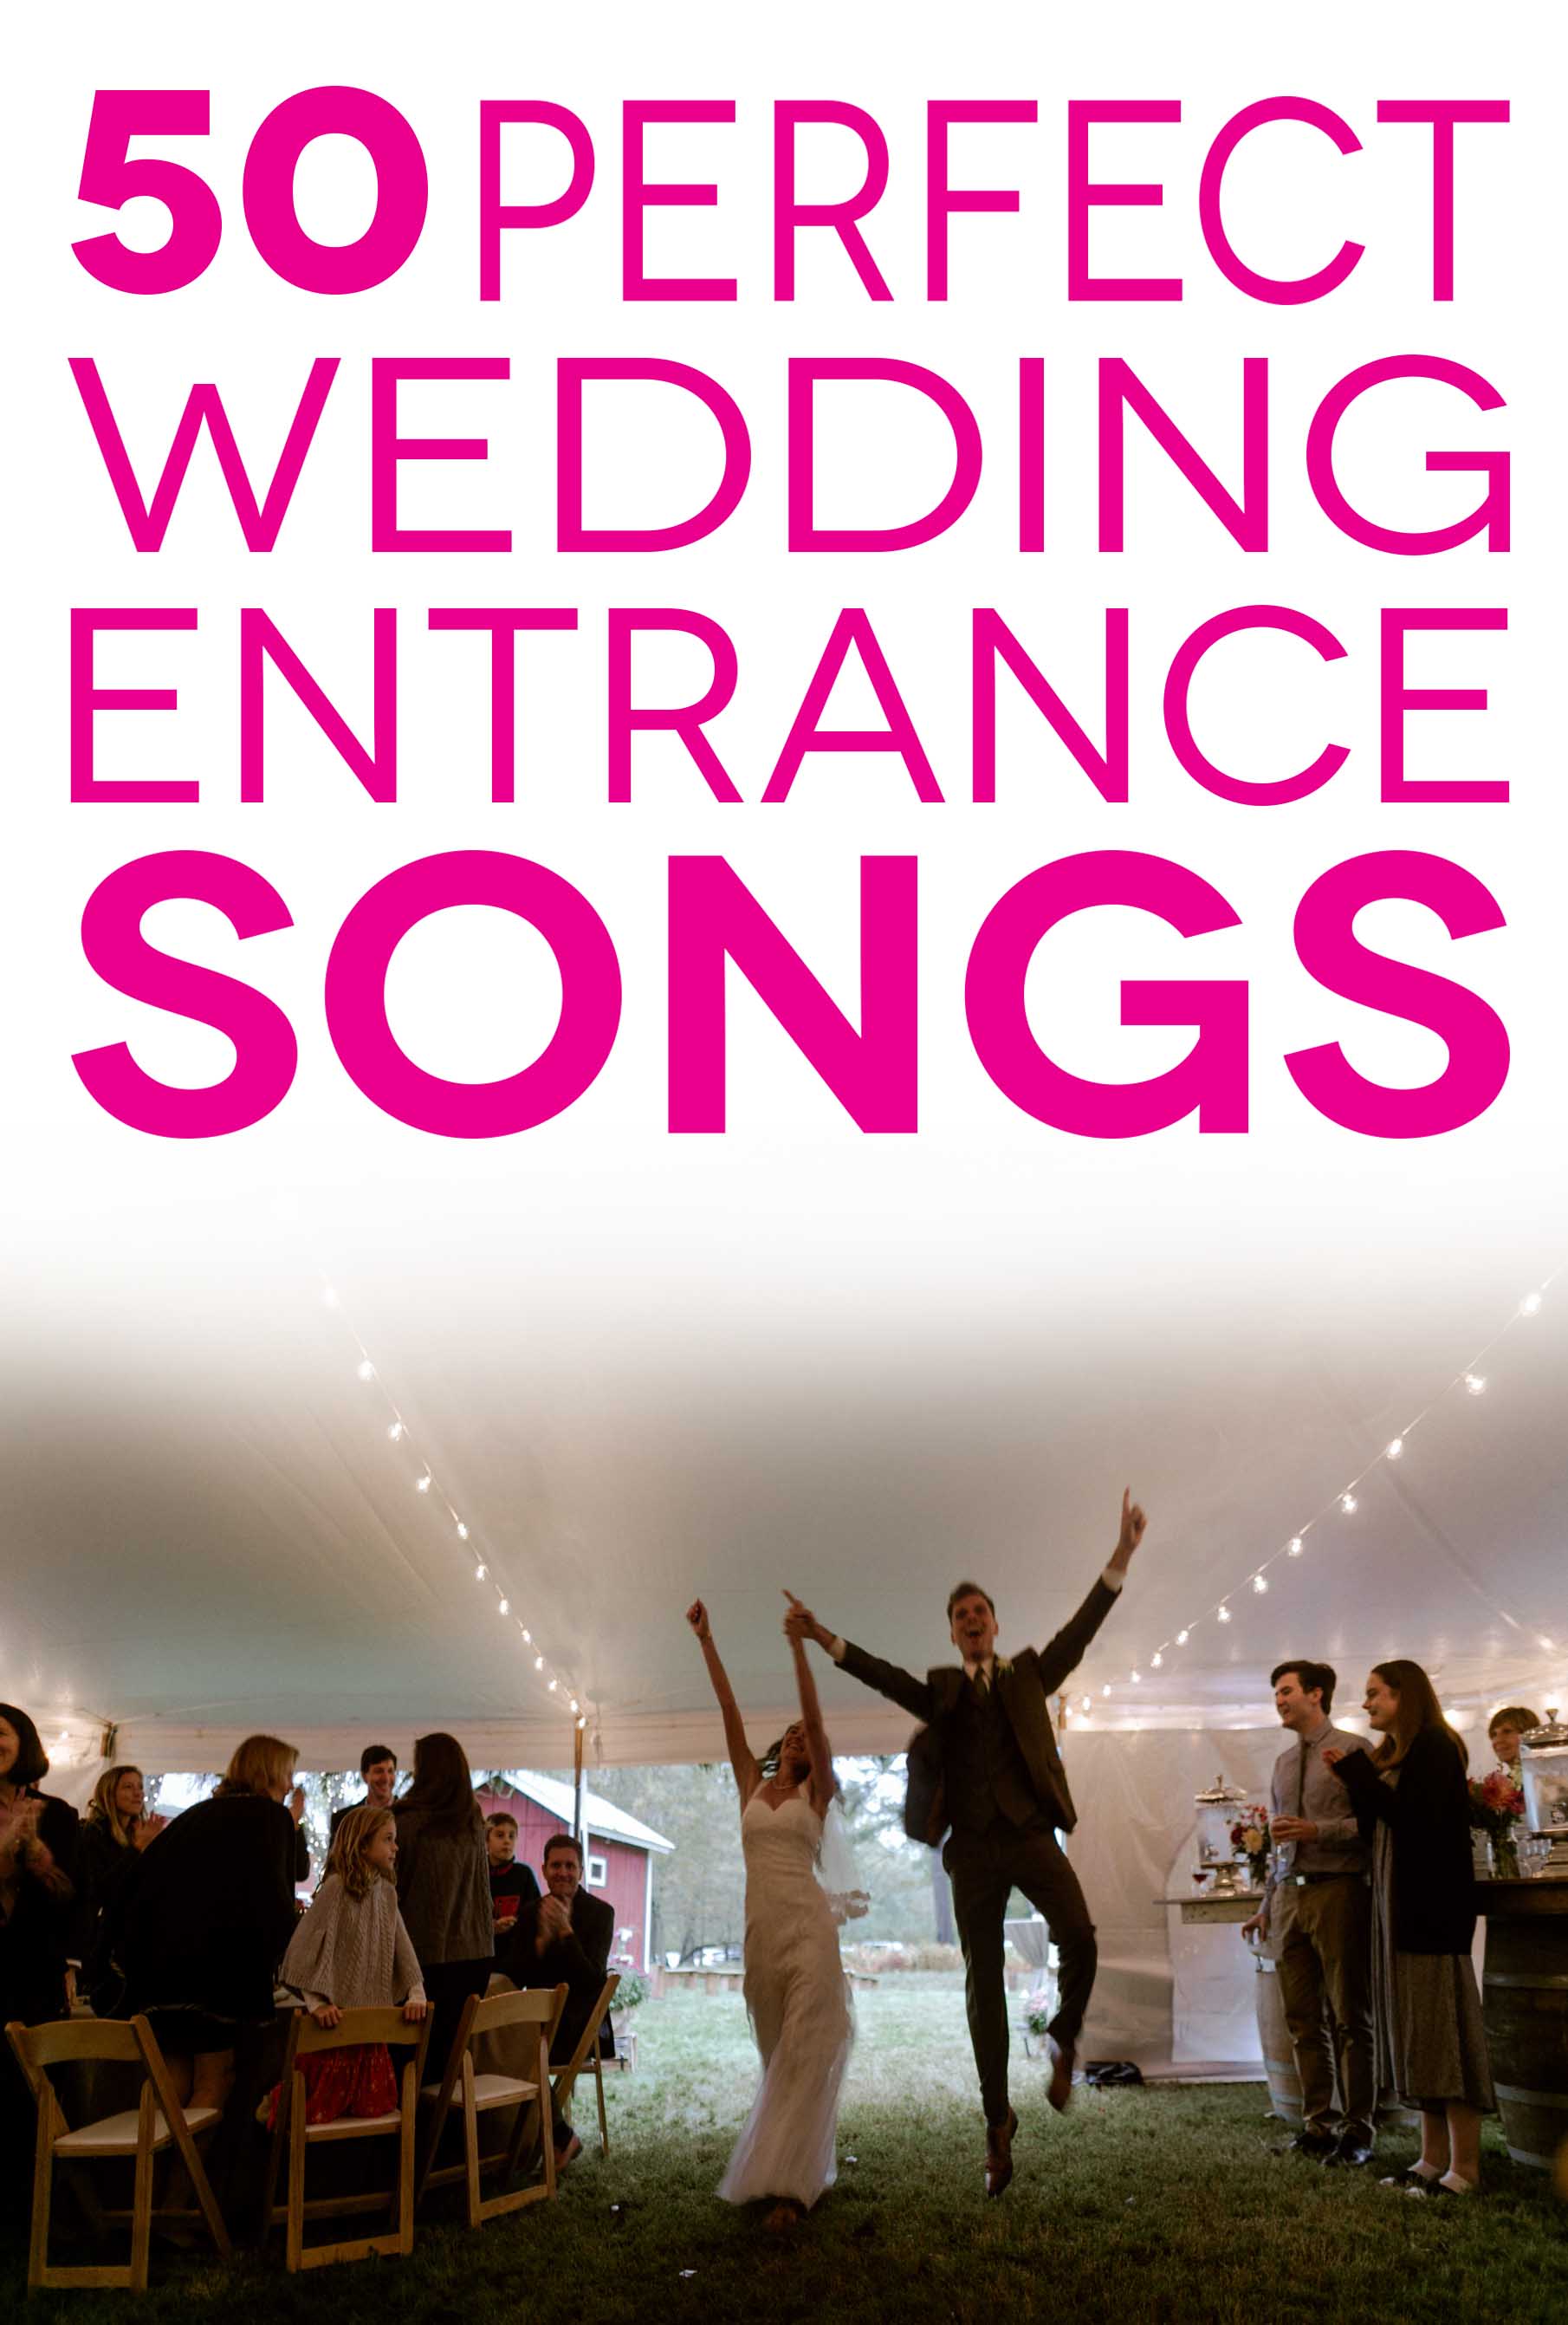 Wedding Entrance Songs To Get The Party Started A Practical Wedding